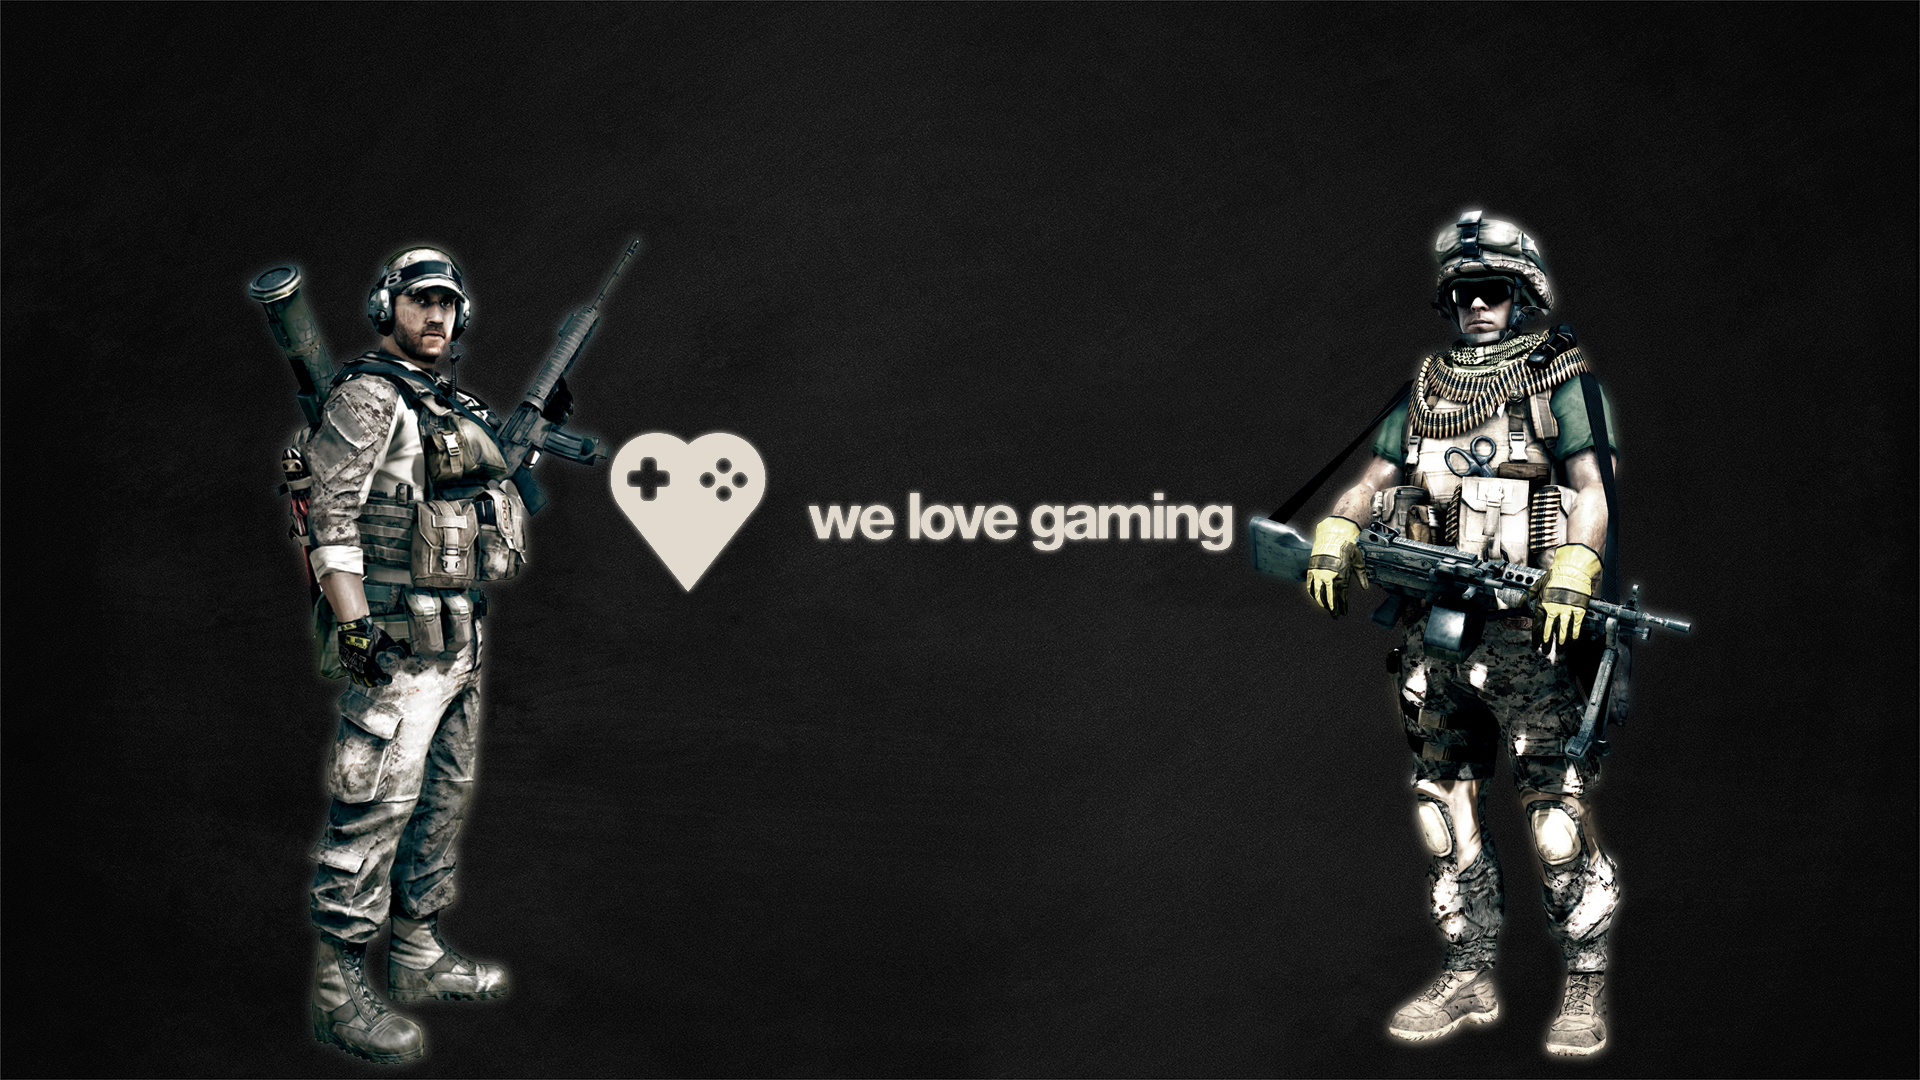 Games one love. We Love games. Love Gaming.